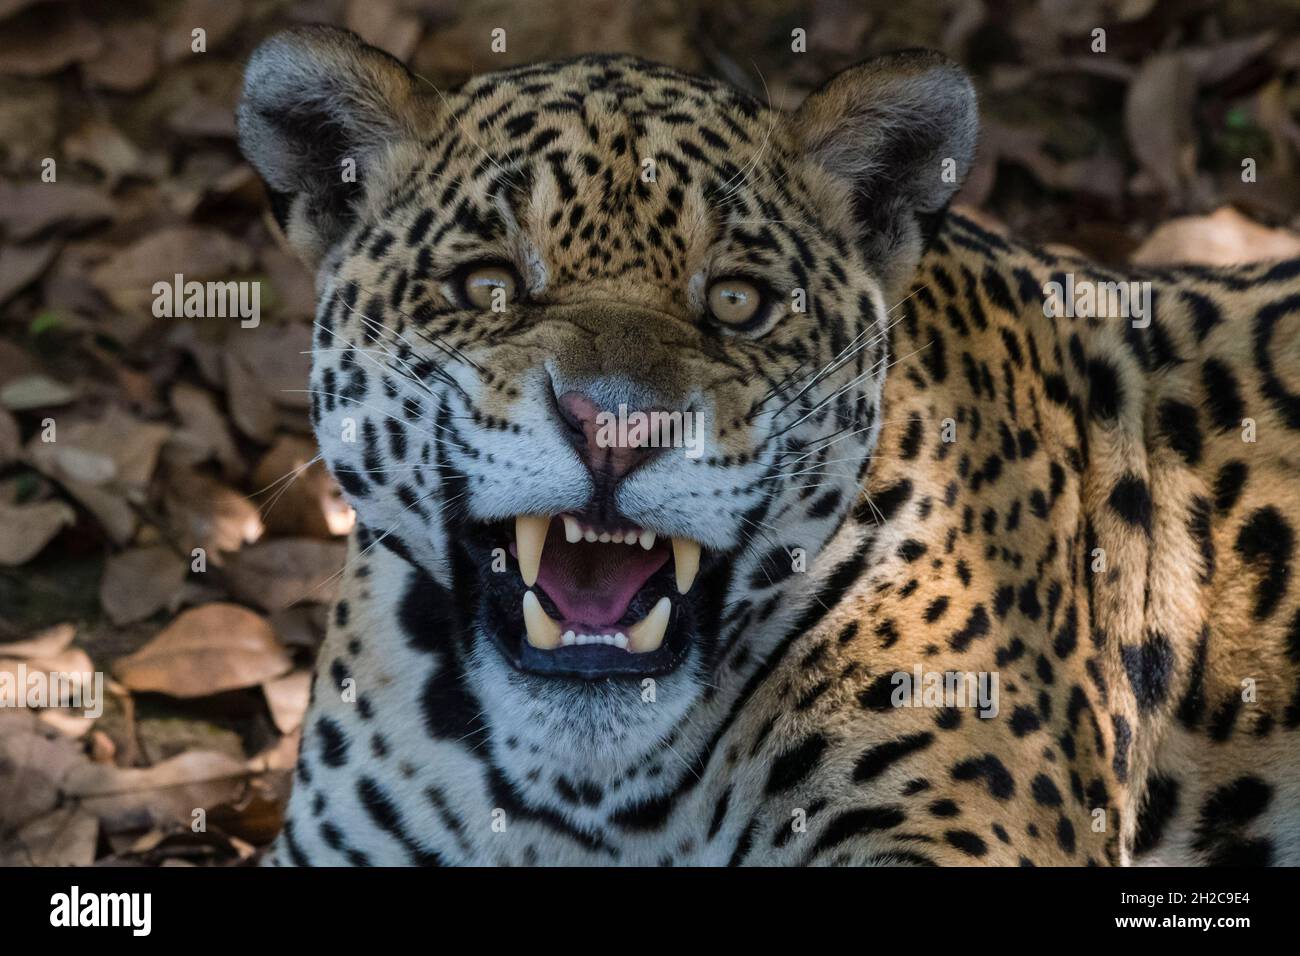 Portrait of a jaguar, Panthera onca, looking at the camera and snarling. Pantanal, Mato Grosso, Brazil Stock Photo